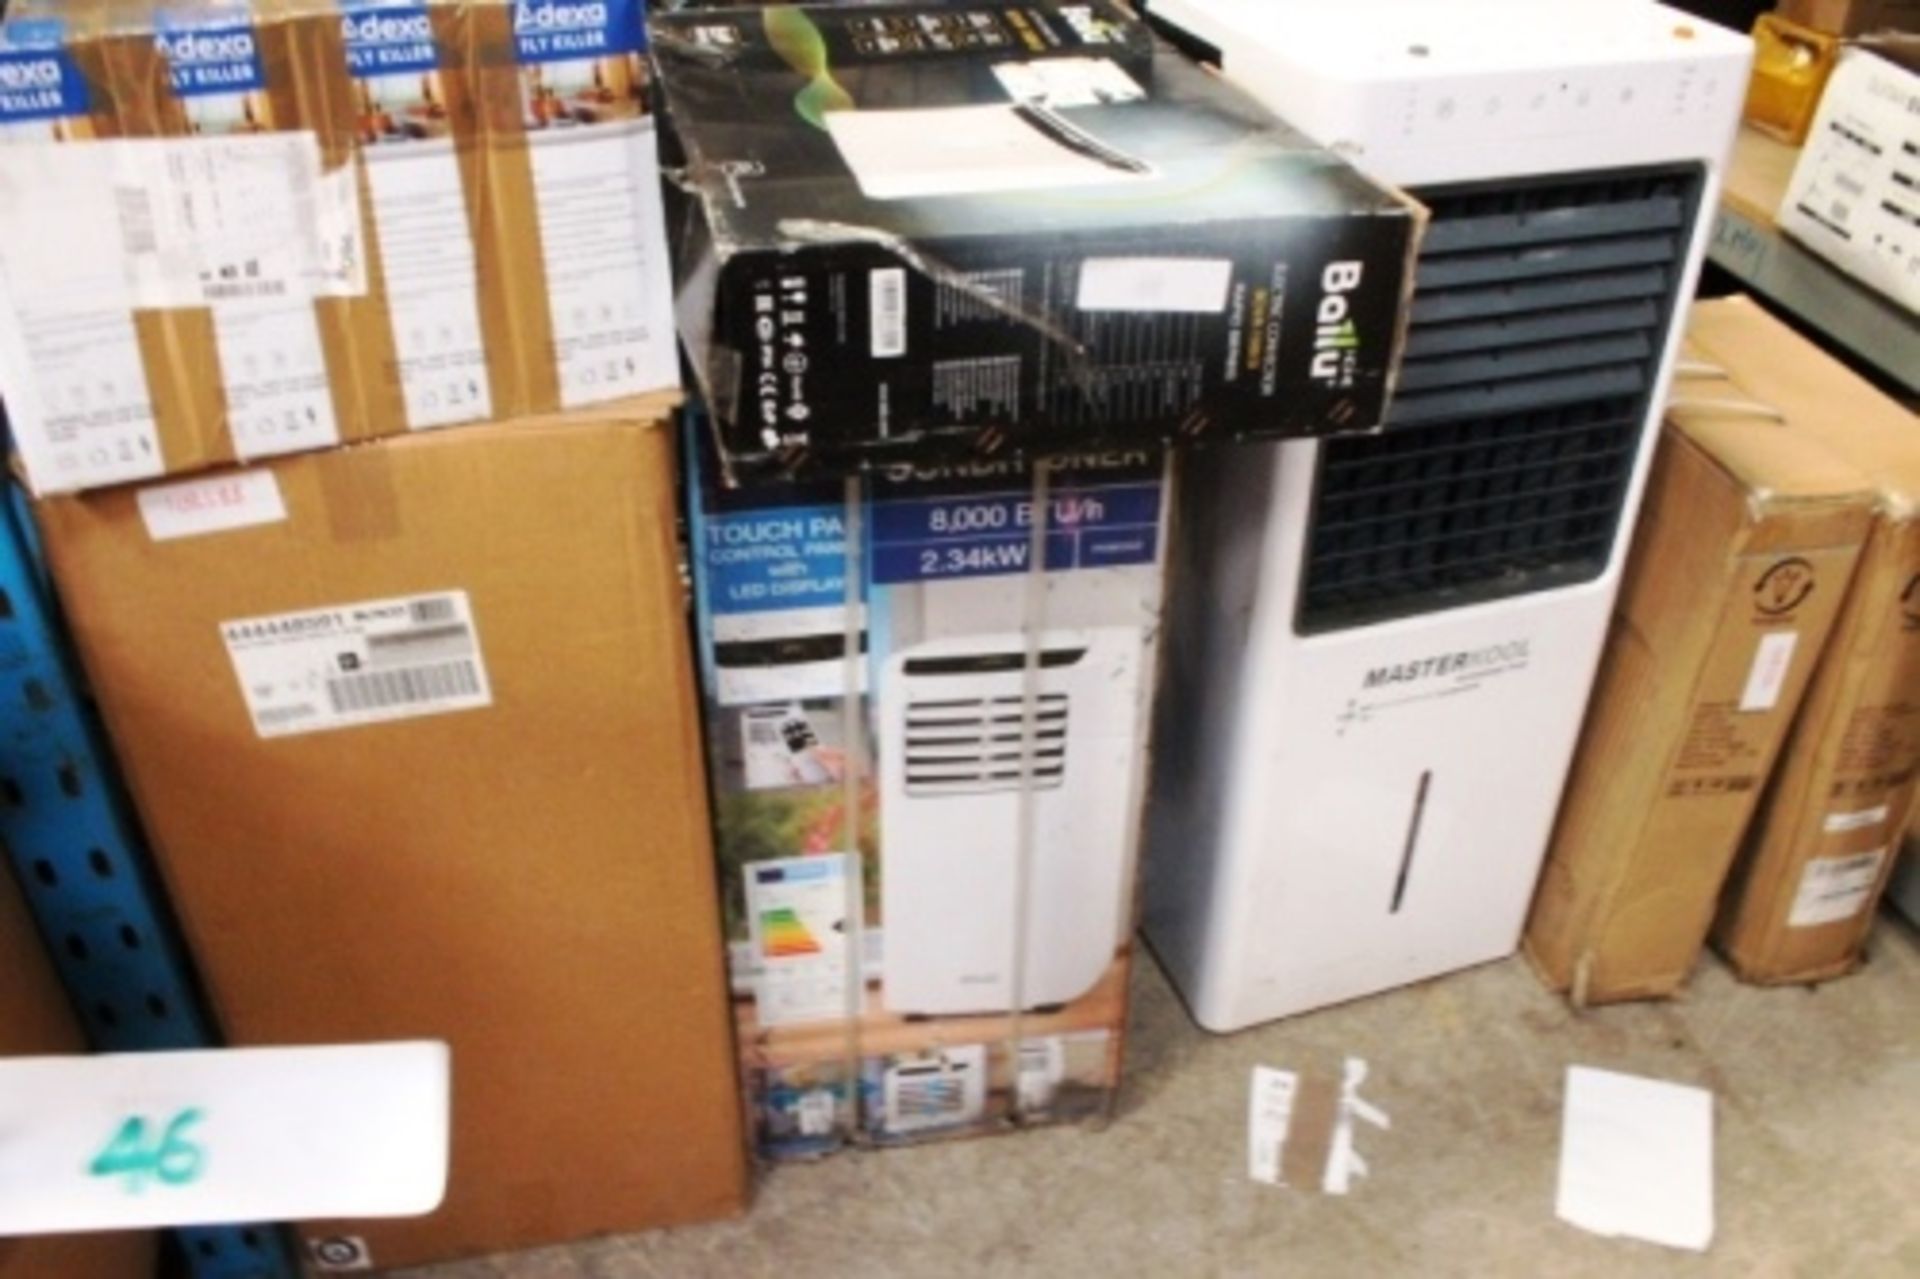 A quantity of heaters/air conditioning units, brands include Arlec, new, Master Kool, second-hand,